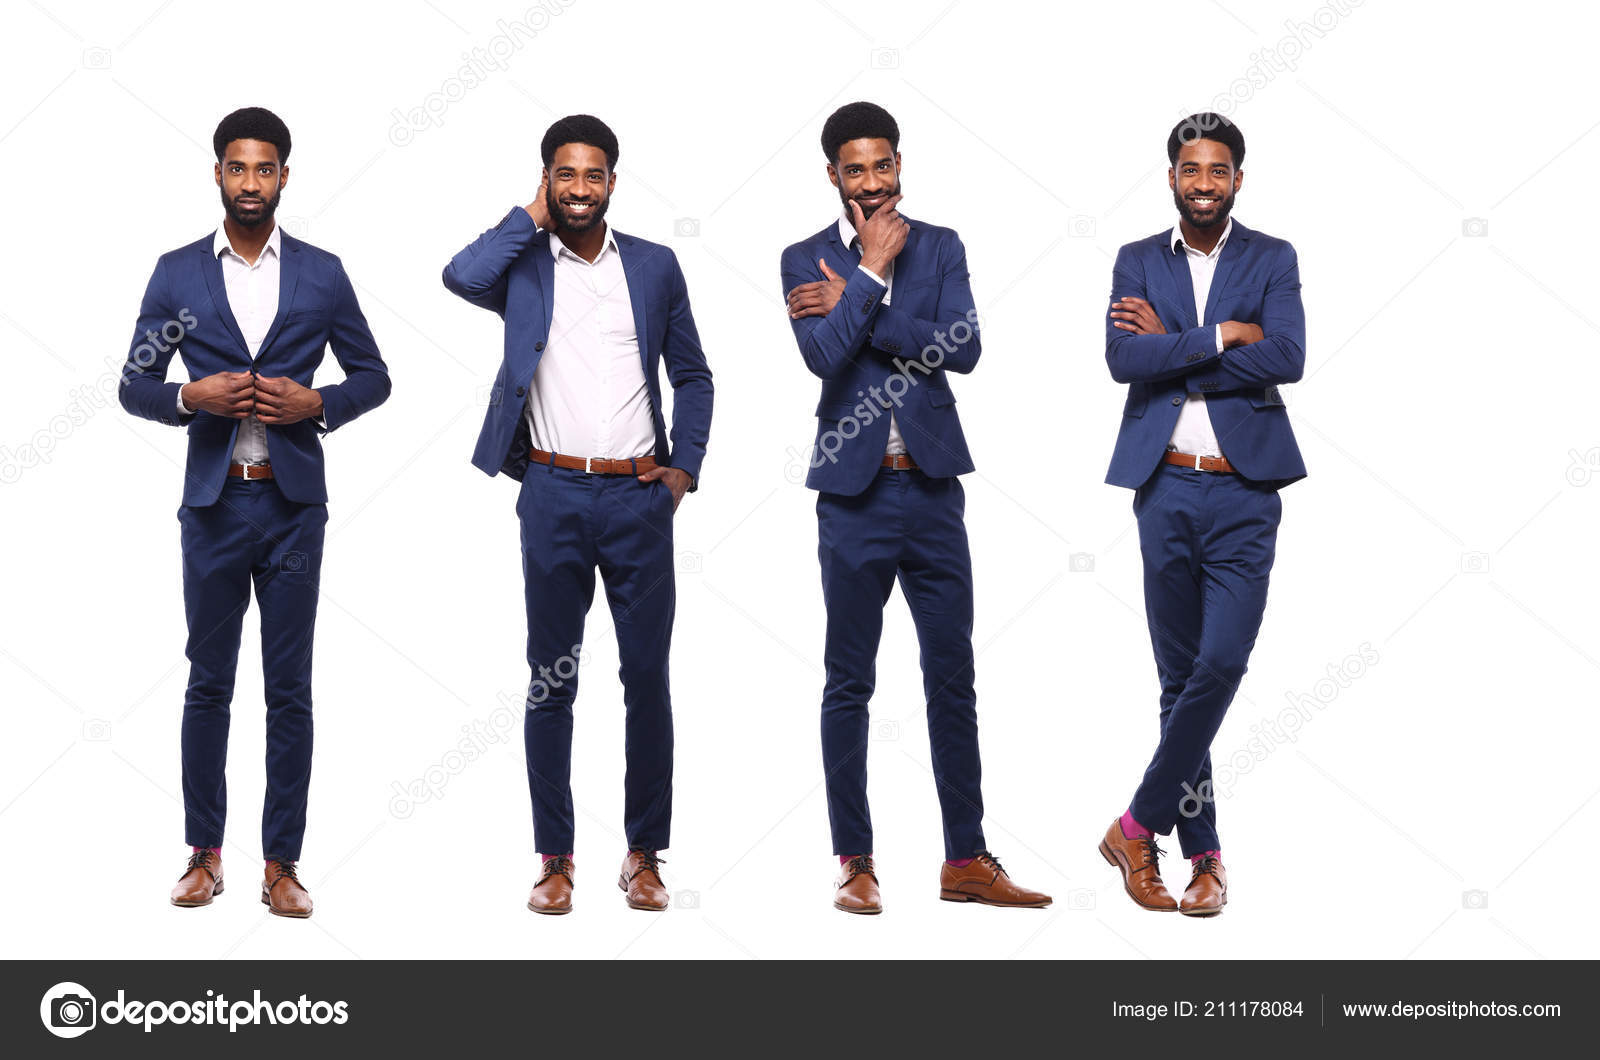 Best Male Poses – Guide to Photographing Men | Skylum Blog